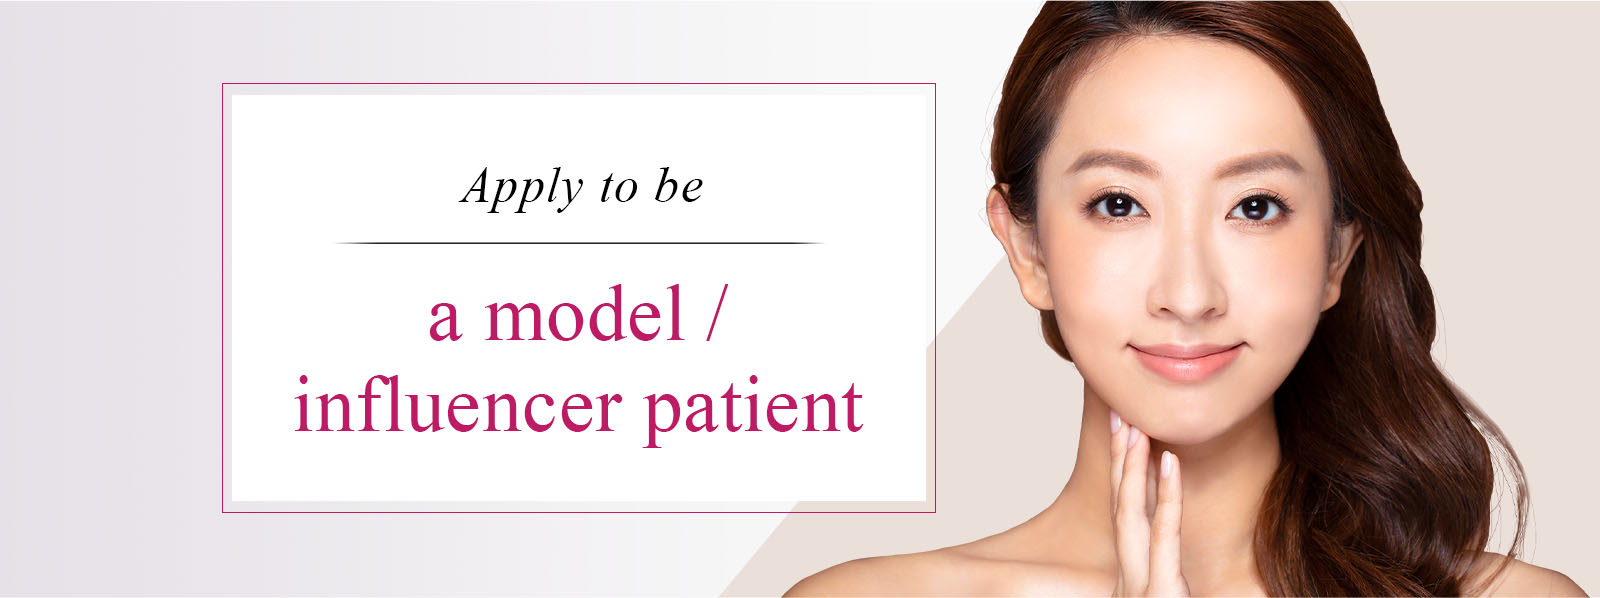 Apply to be a model / influencer patient